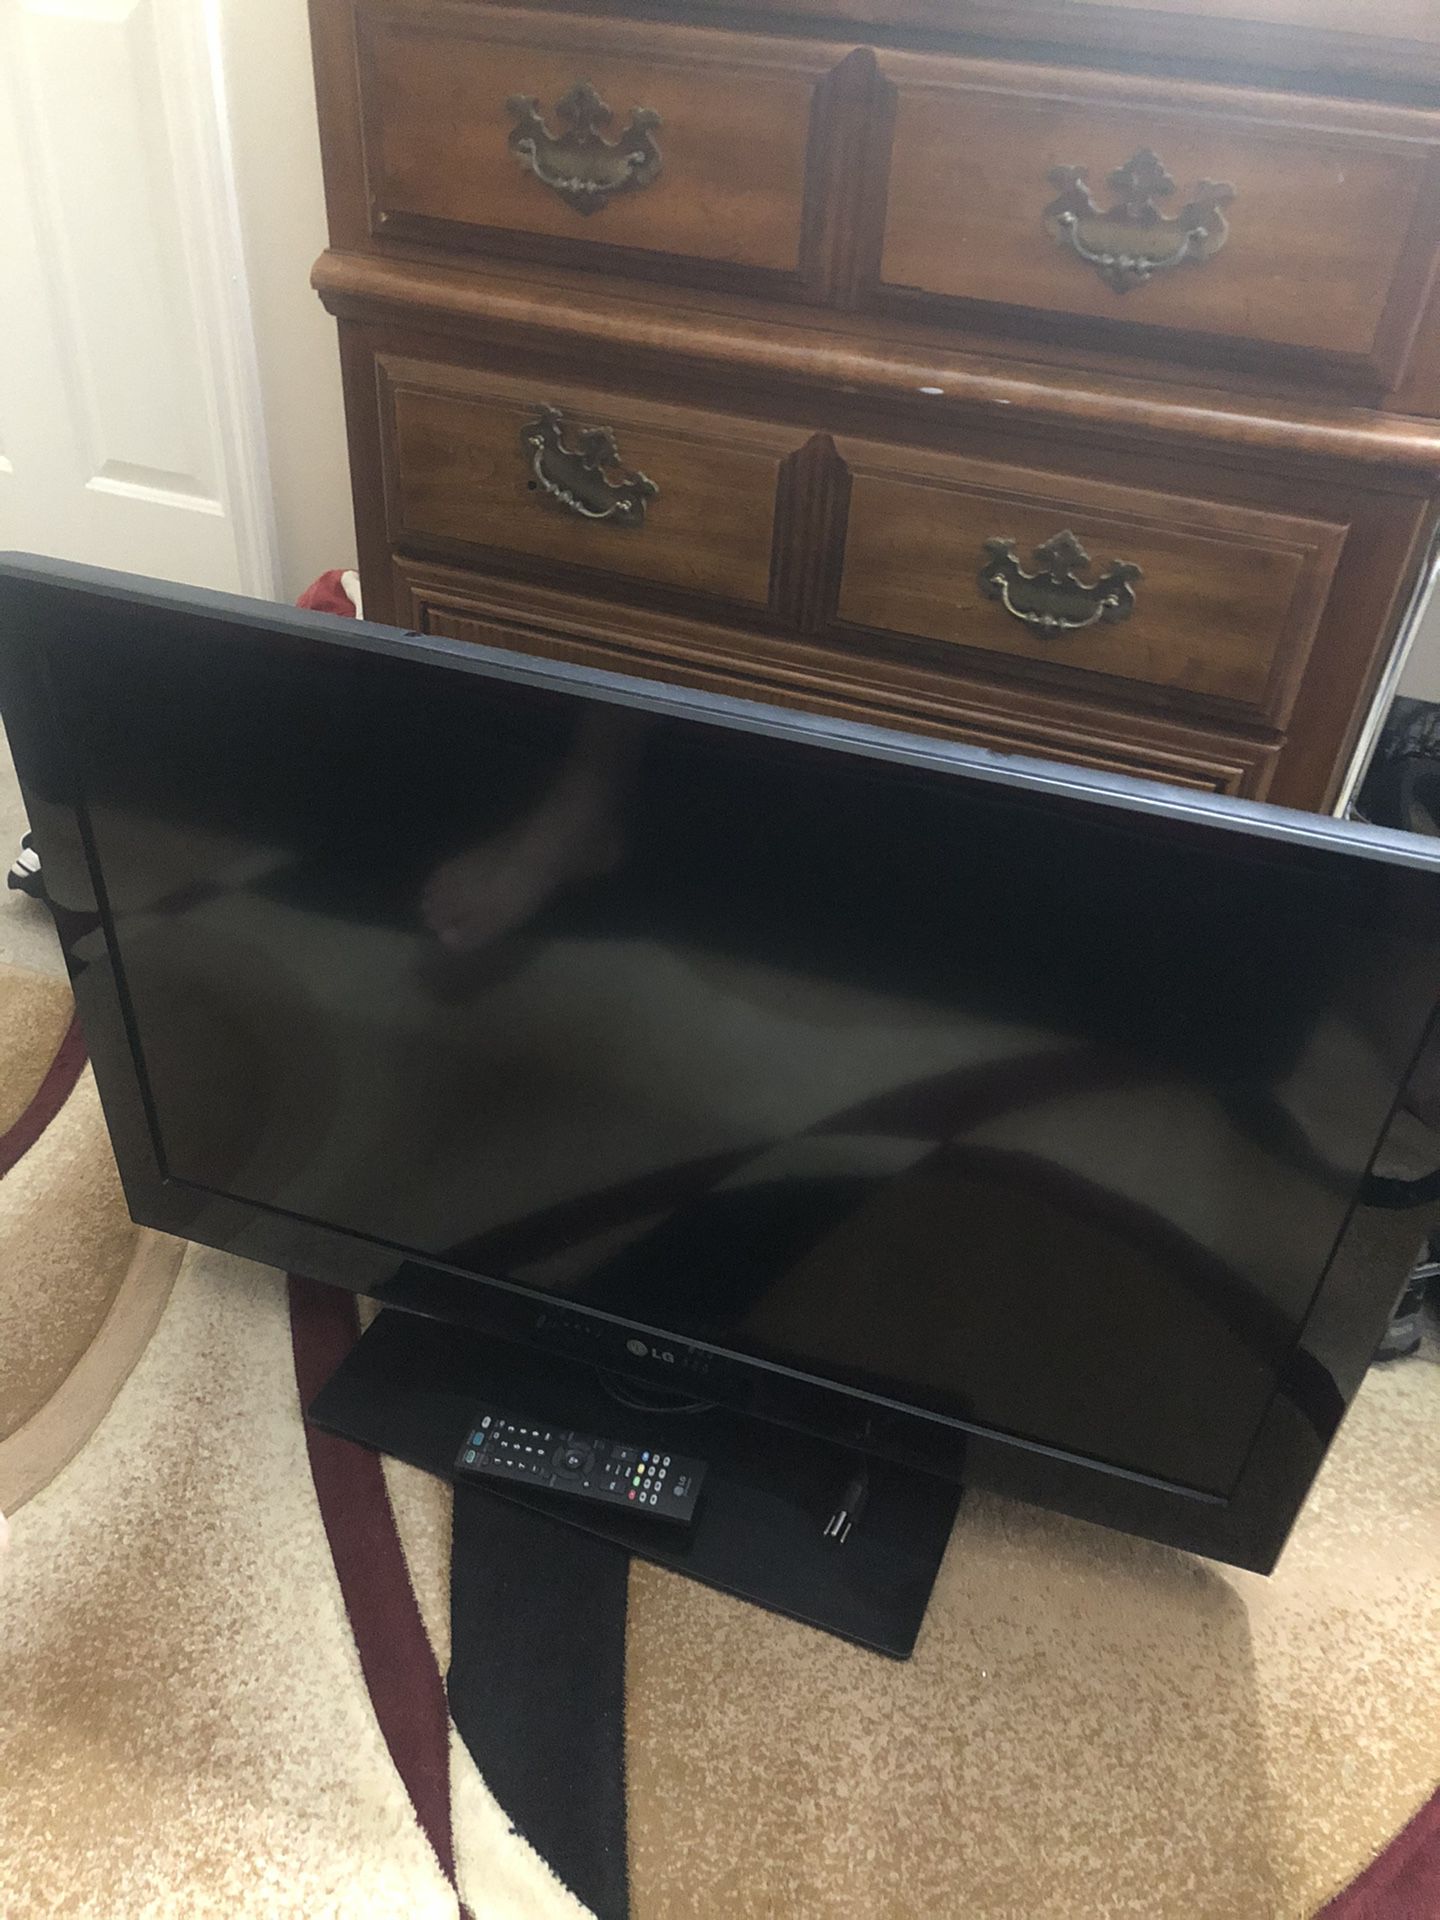 LG tv 42” for sale